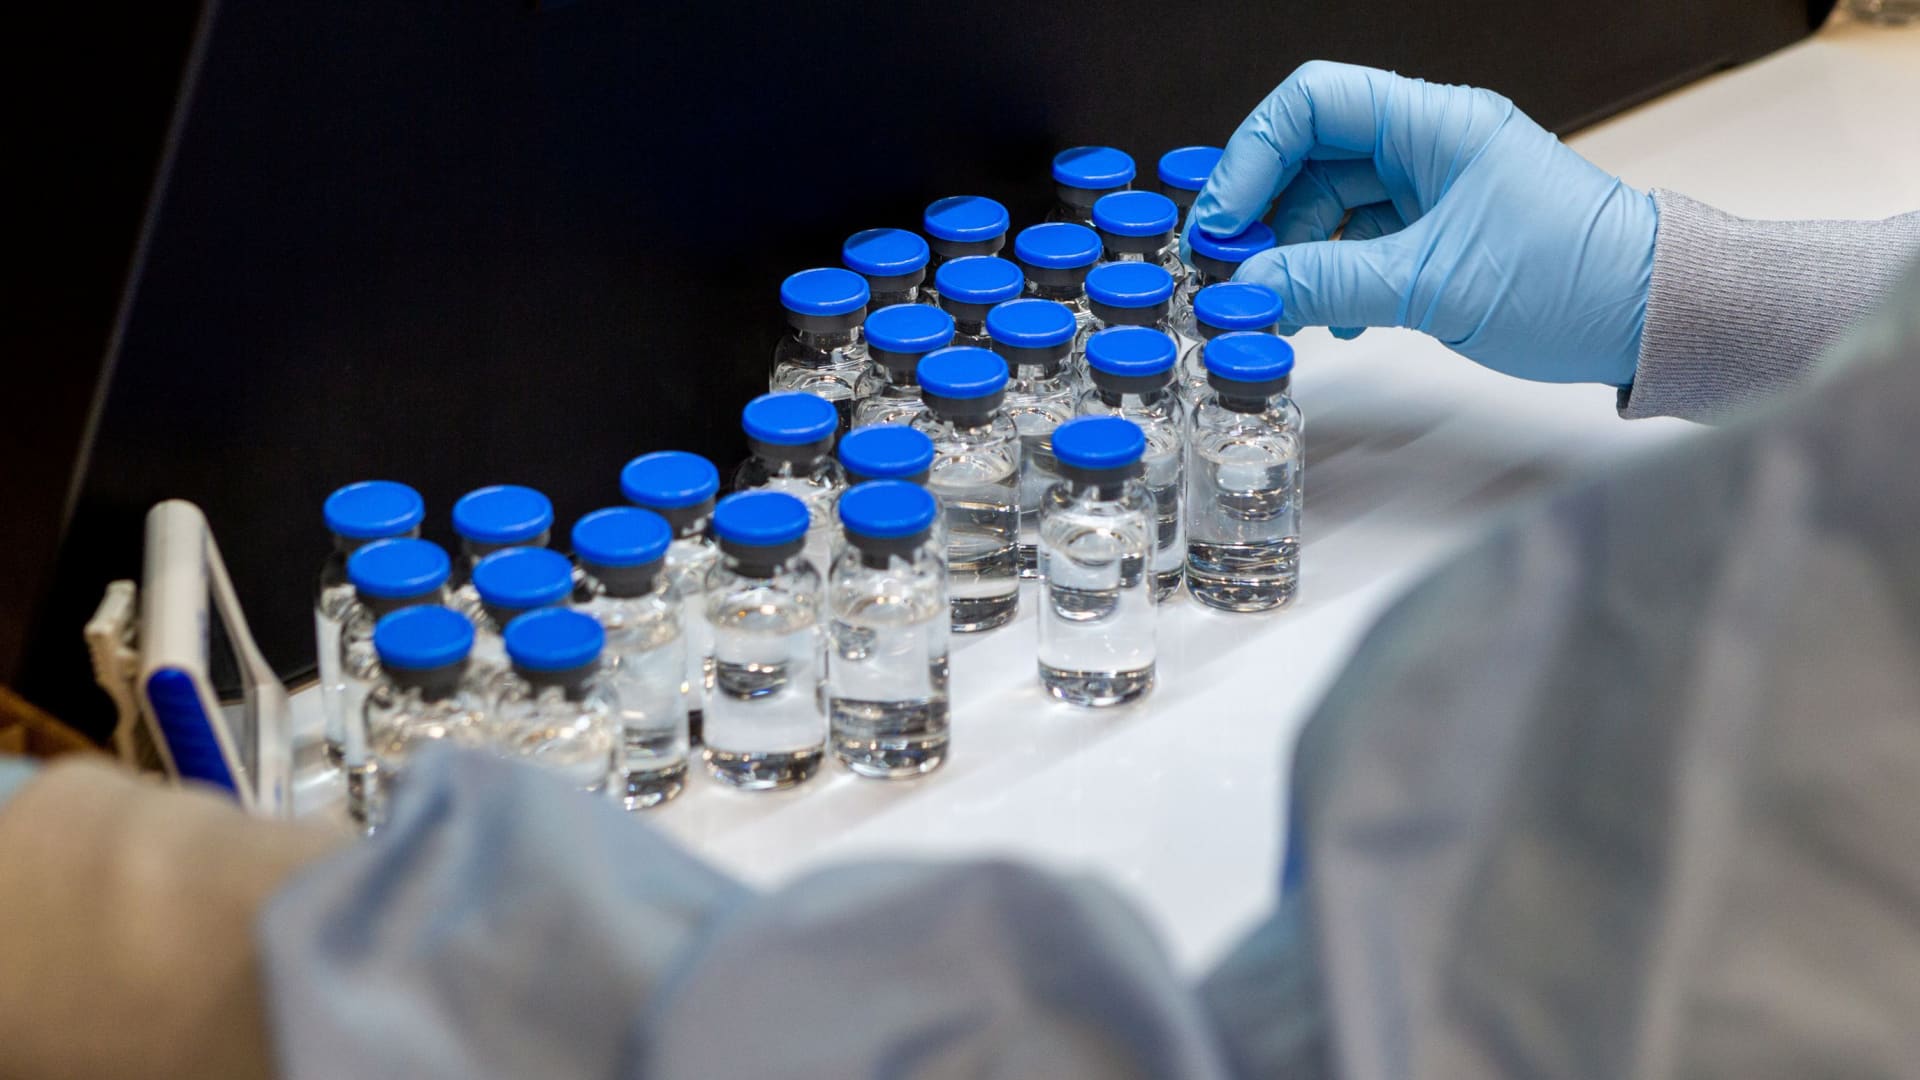 A lab technician inspects filled vials of investigational coronavirus disease (COVID-19) treatment drug remdesivir at a Gilead Sciences facility in La Verne, California.